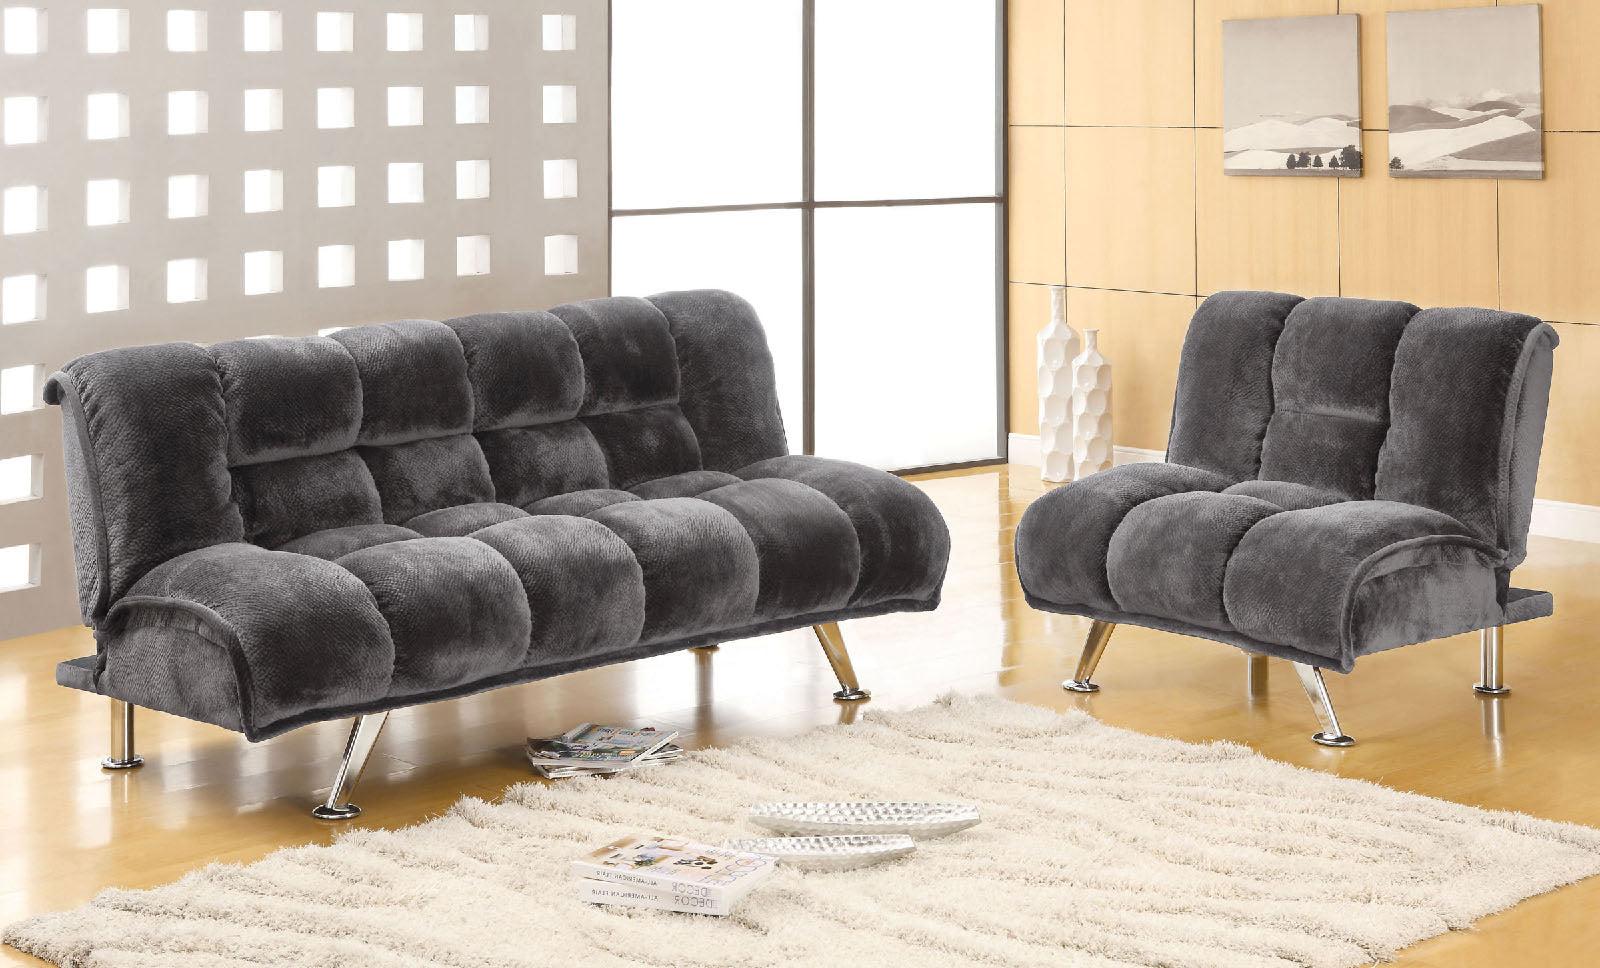 Contemporary Futon Sofa and Chair CM2904GY-2PC Marbelle CM2904GY-2PC in Gray 